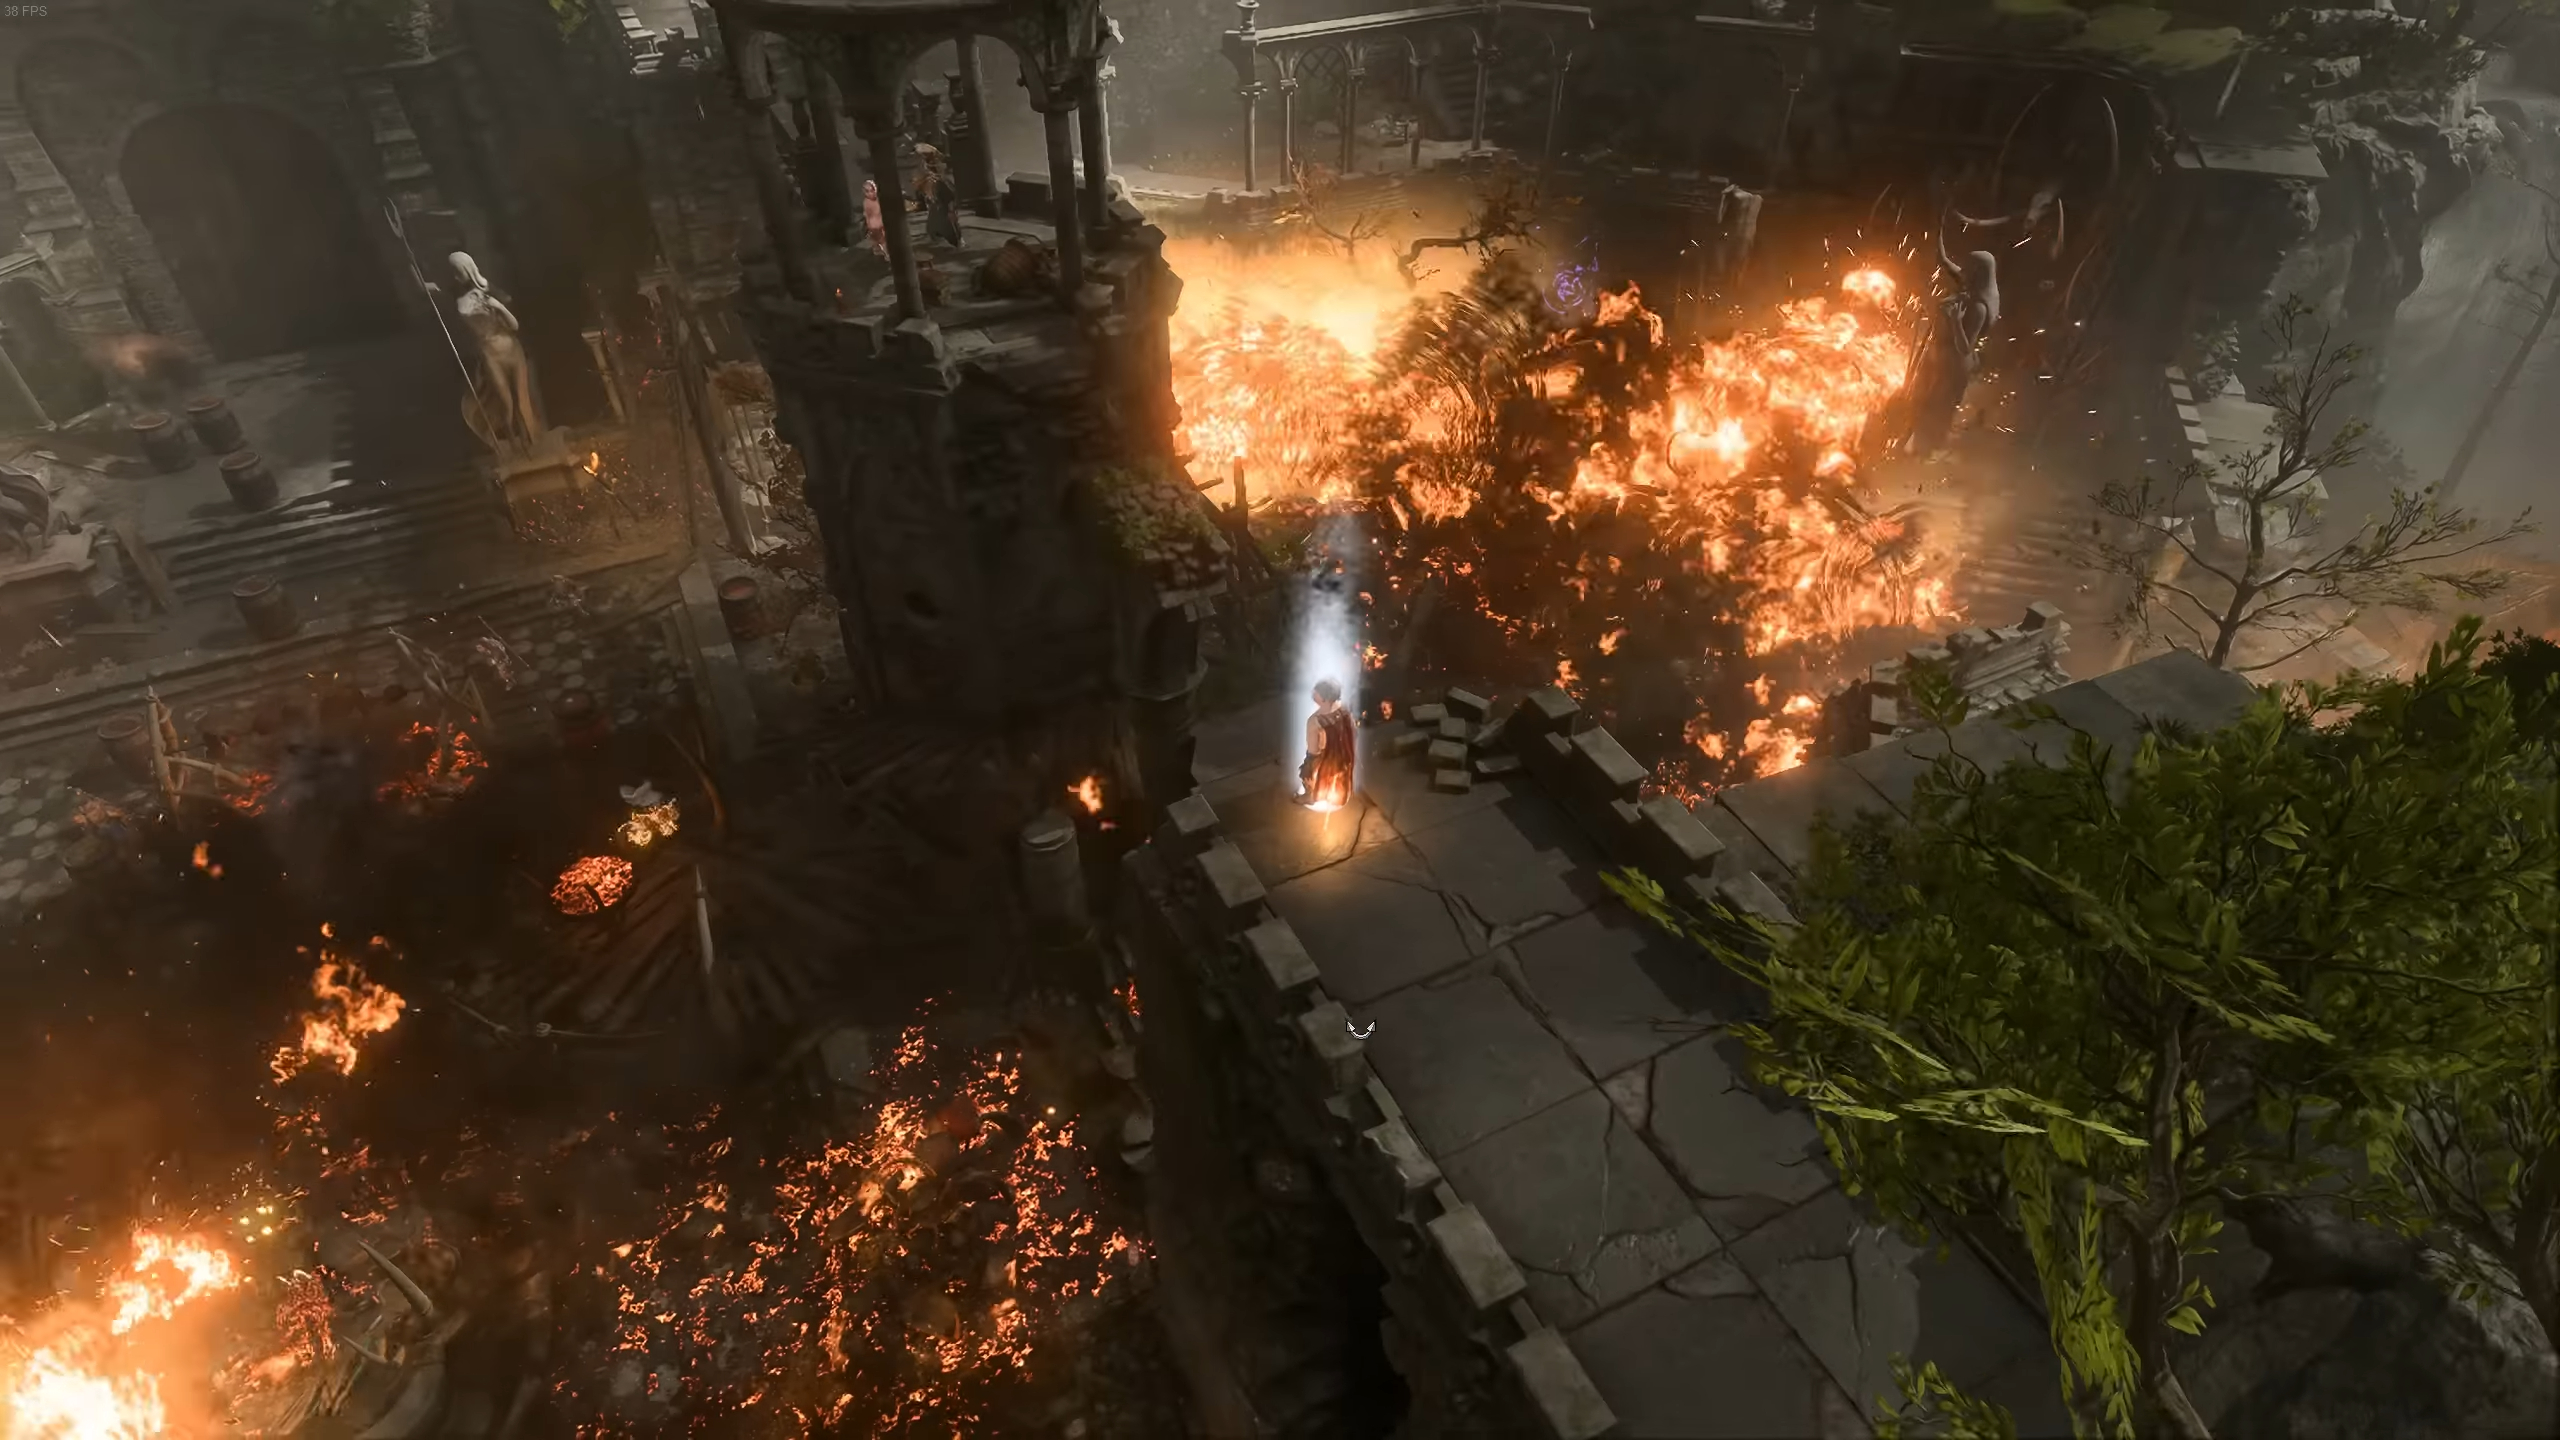 A Halfling barbarian character standing over a ledge in Baldur’s Gate 3, witnessing massive explosions below.